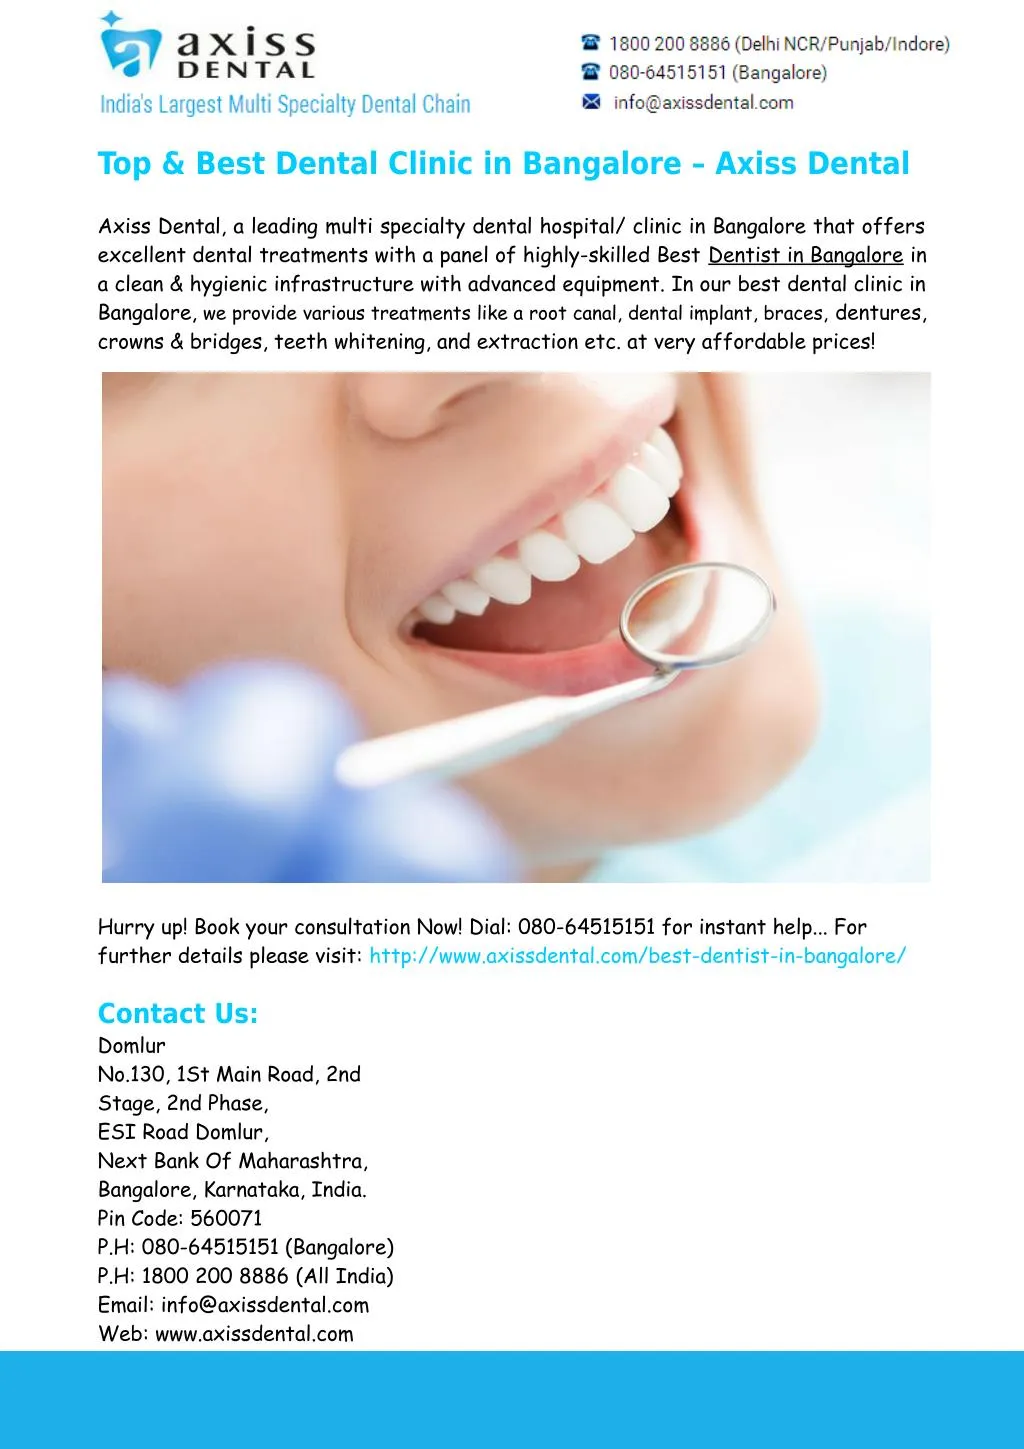 top best dental clinic in bangalore axiss dental